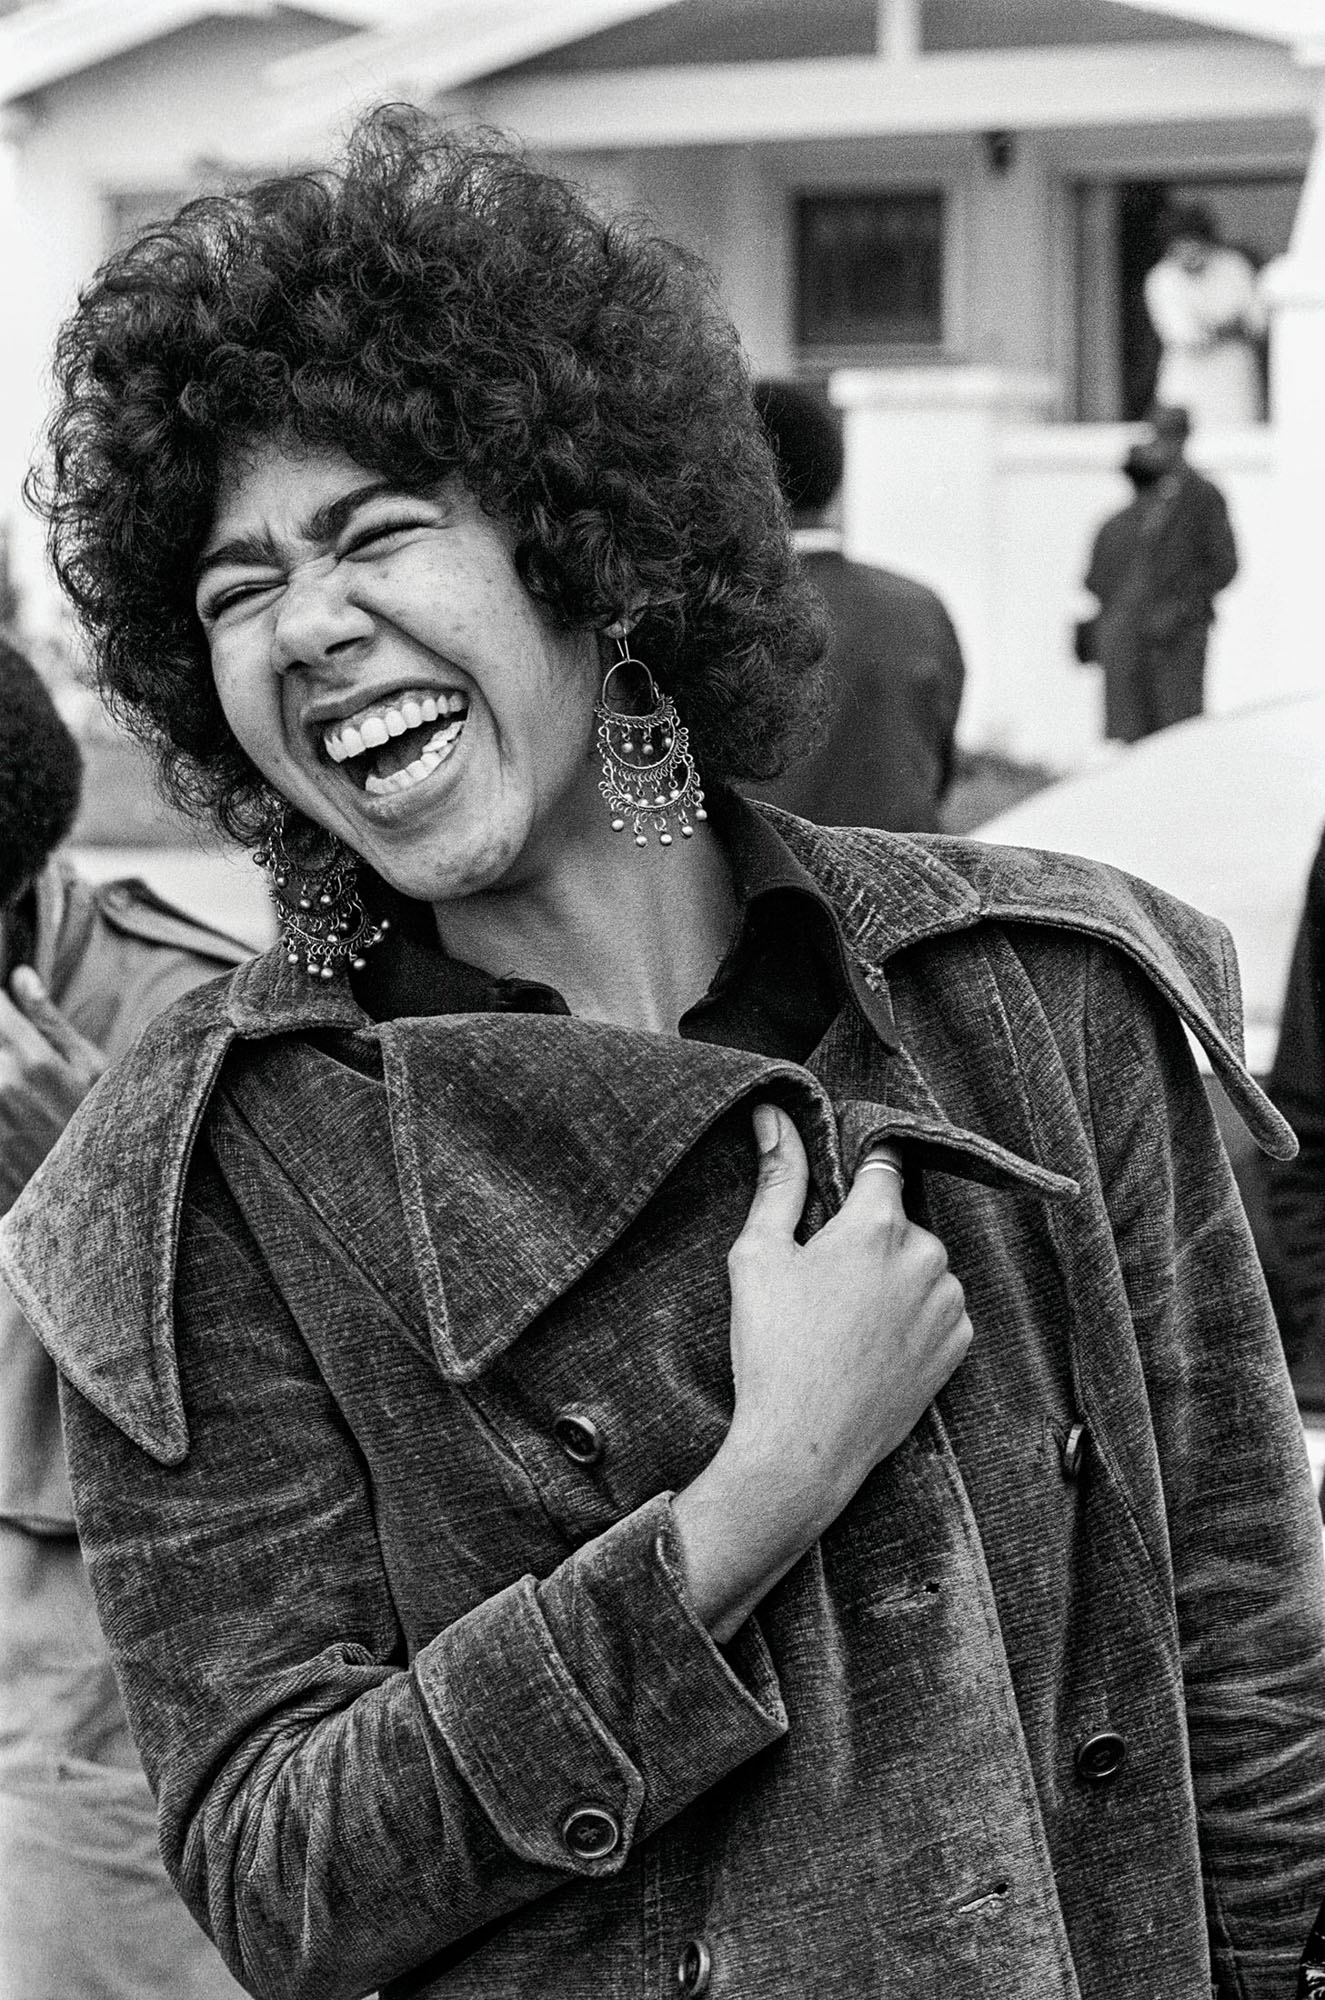 March 31, 1972 - Oakland, California, USA: Black Panther member Ericka Huggins laughs with comrades after the Black Community Survival Conference. She served in the Los Angeles, New Haven, and Oakland offices of the party.